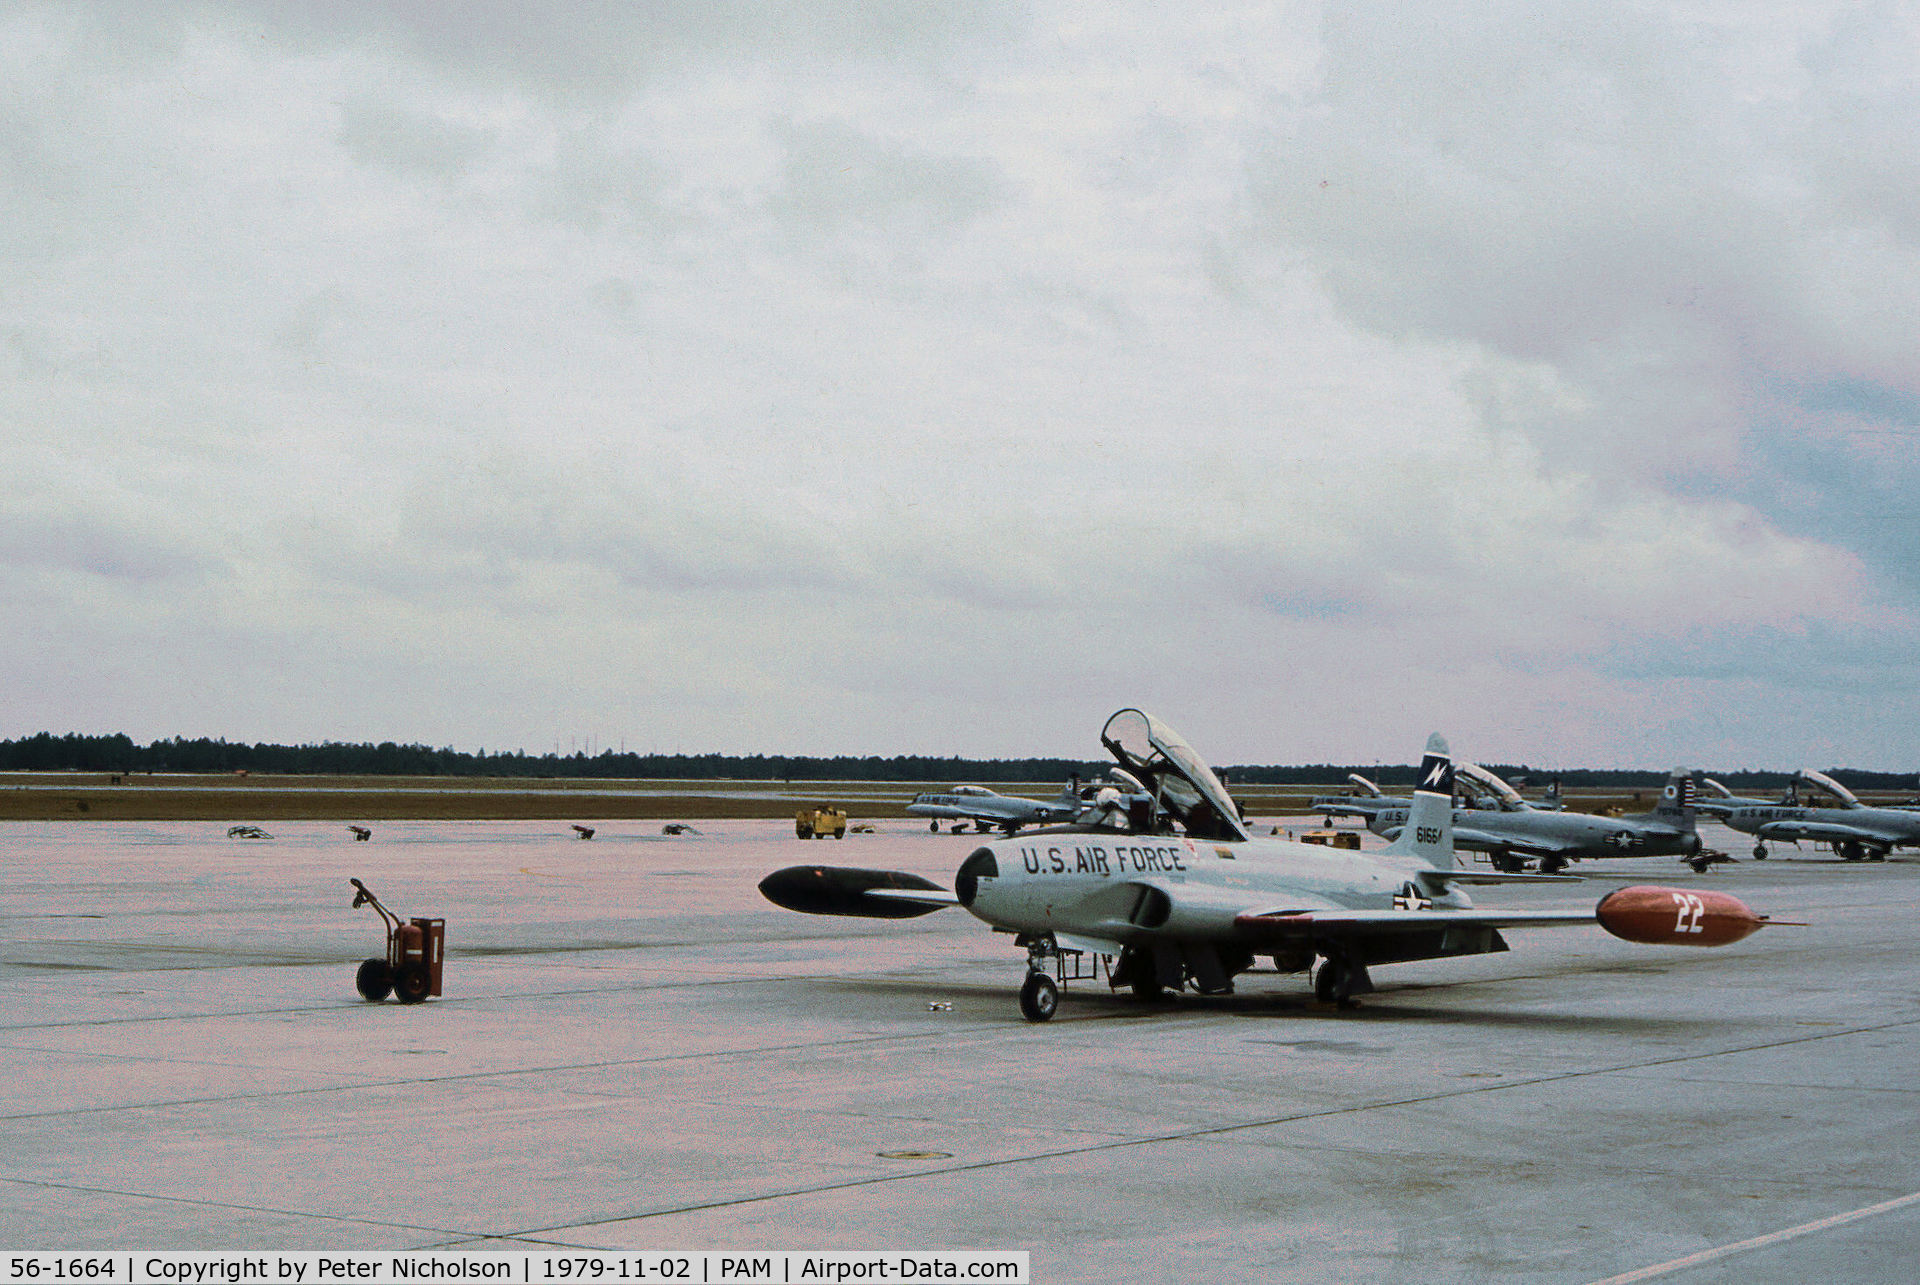 56-1664, 1956 Lockheed T-33A Shooting Star C/N 580-1014, T-33A Shooting Star of 95th Fighter Interceptor Training Squadron at Tyndall AFB in November 1979.